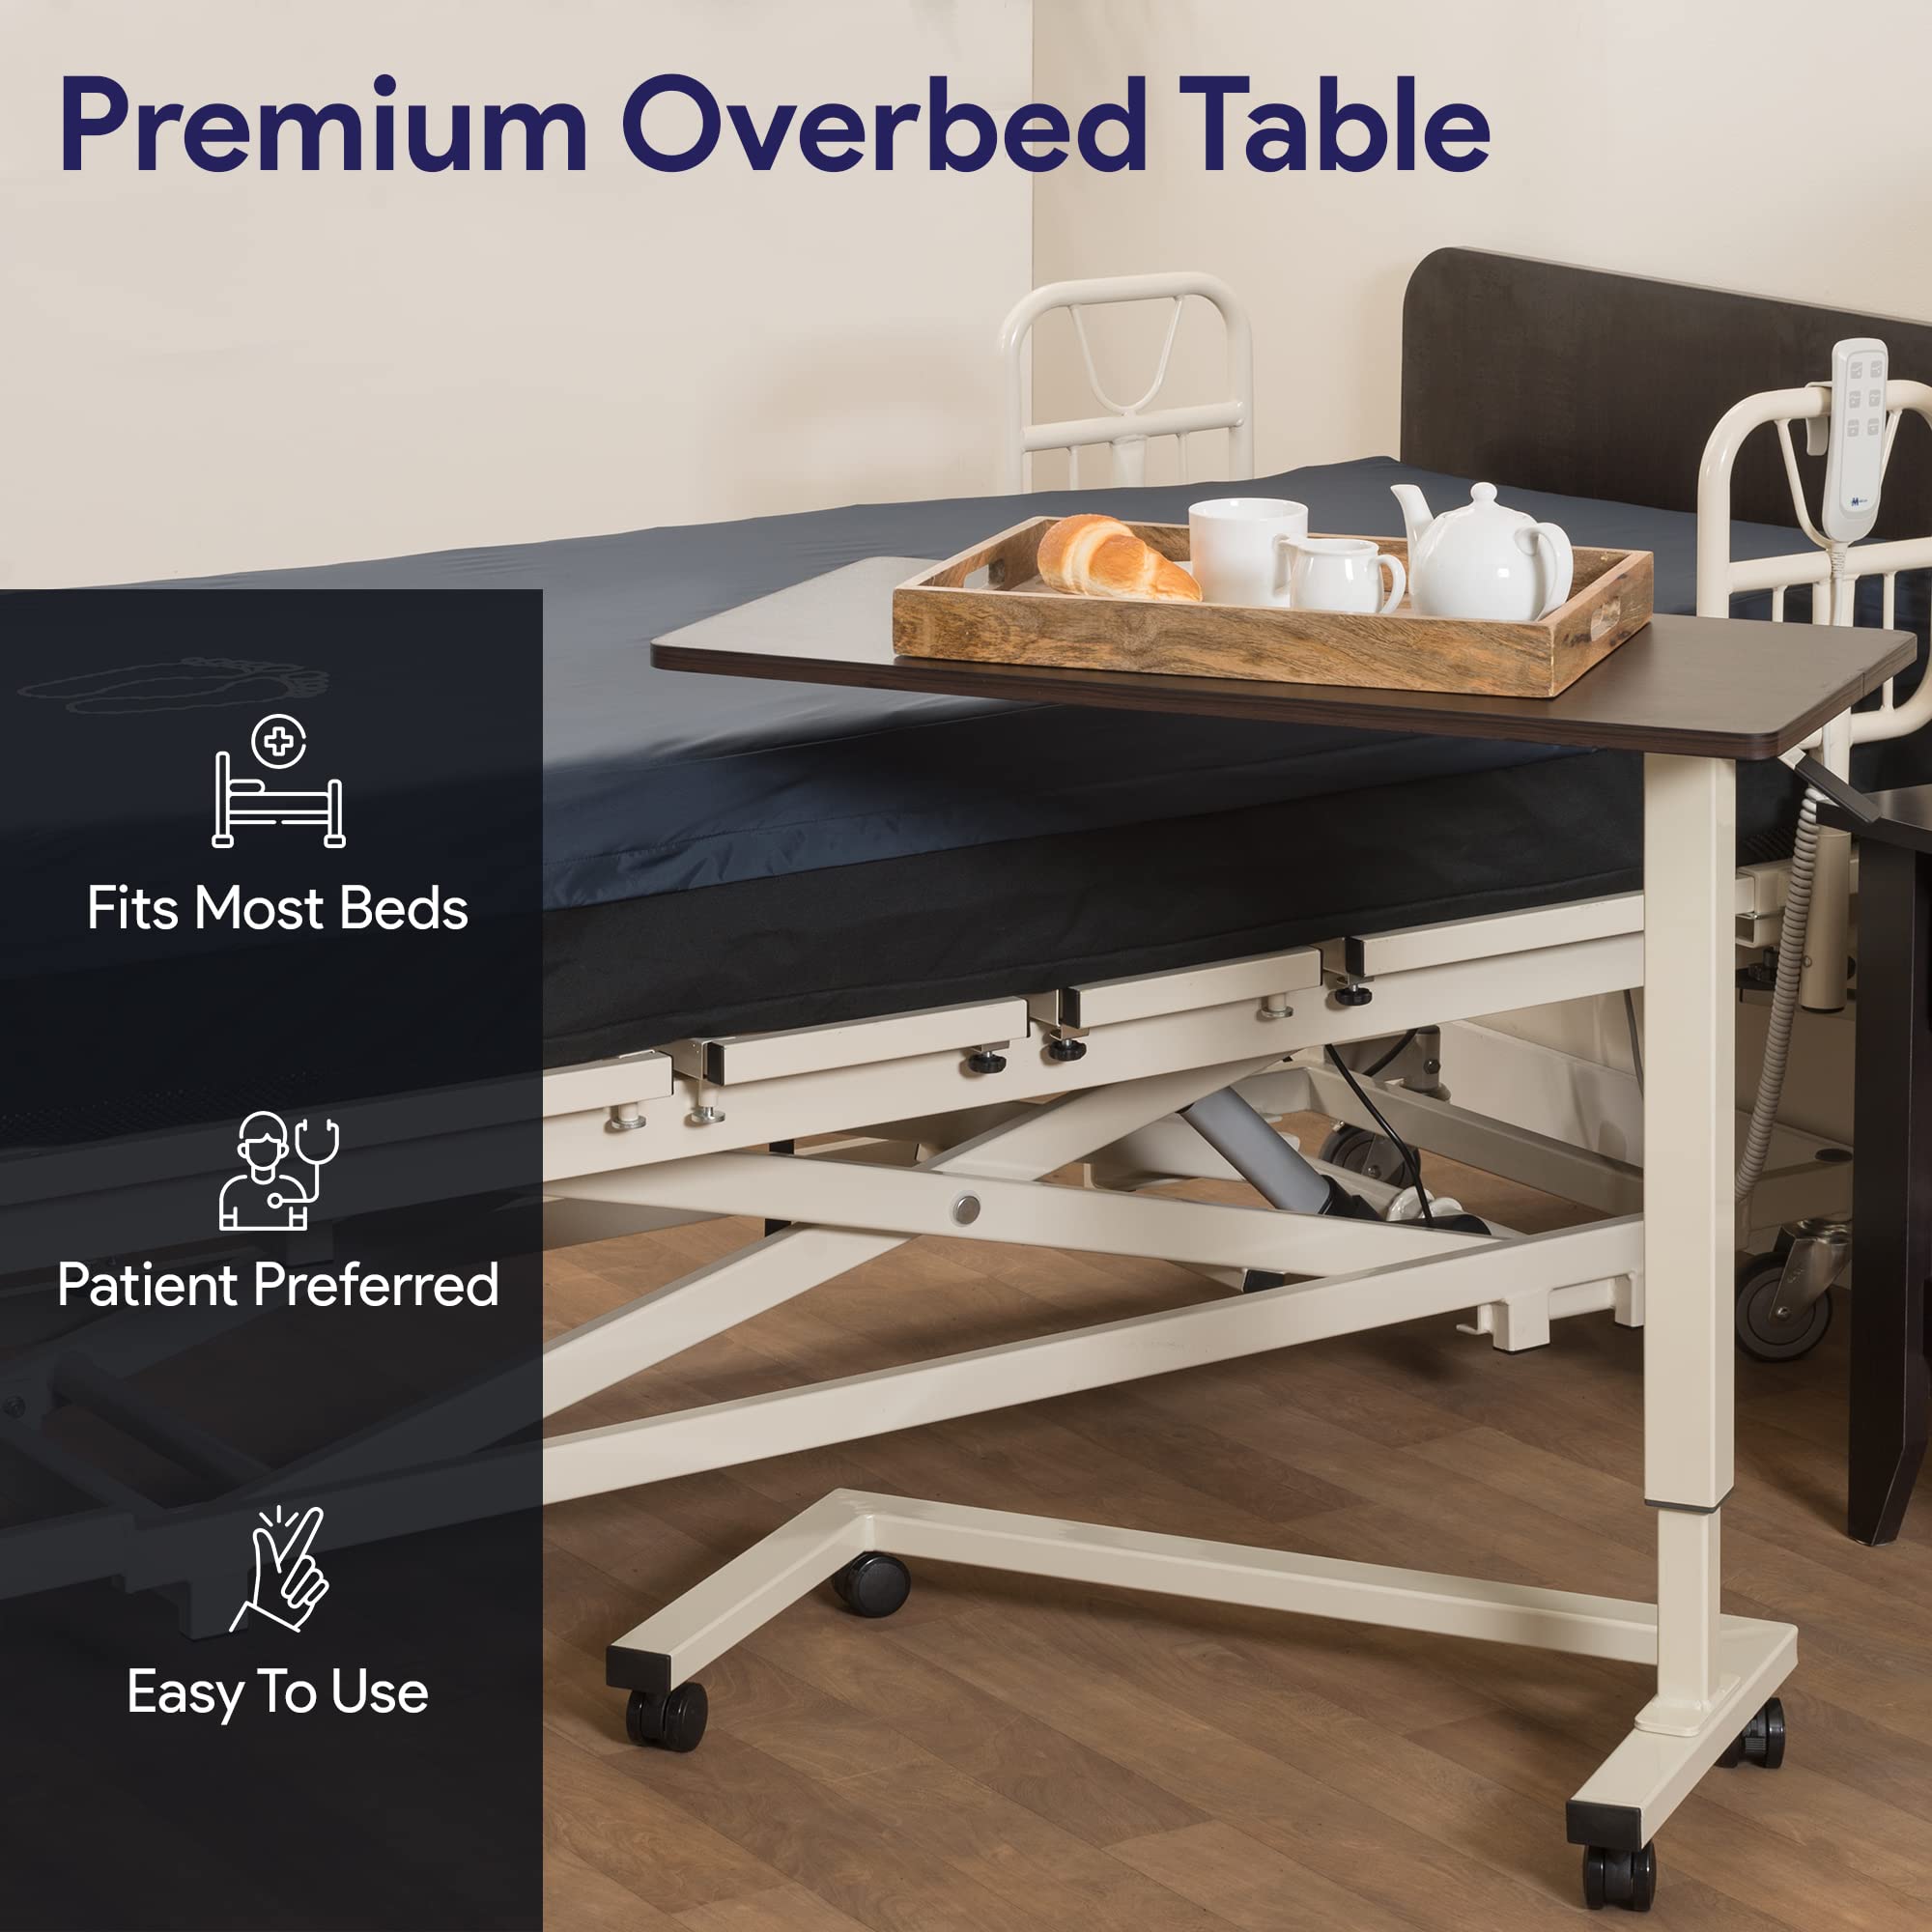 Medacure Hospital Bed Table - Overbed Table with Wheels & Adjustable Height - Food, Laptop, and Reading Overbed Desk - 50lb Capacity Over The Bed Table  - Like New